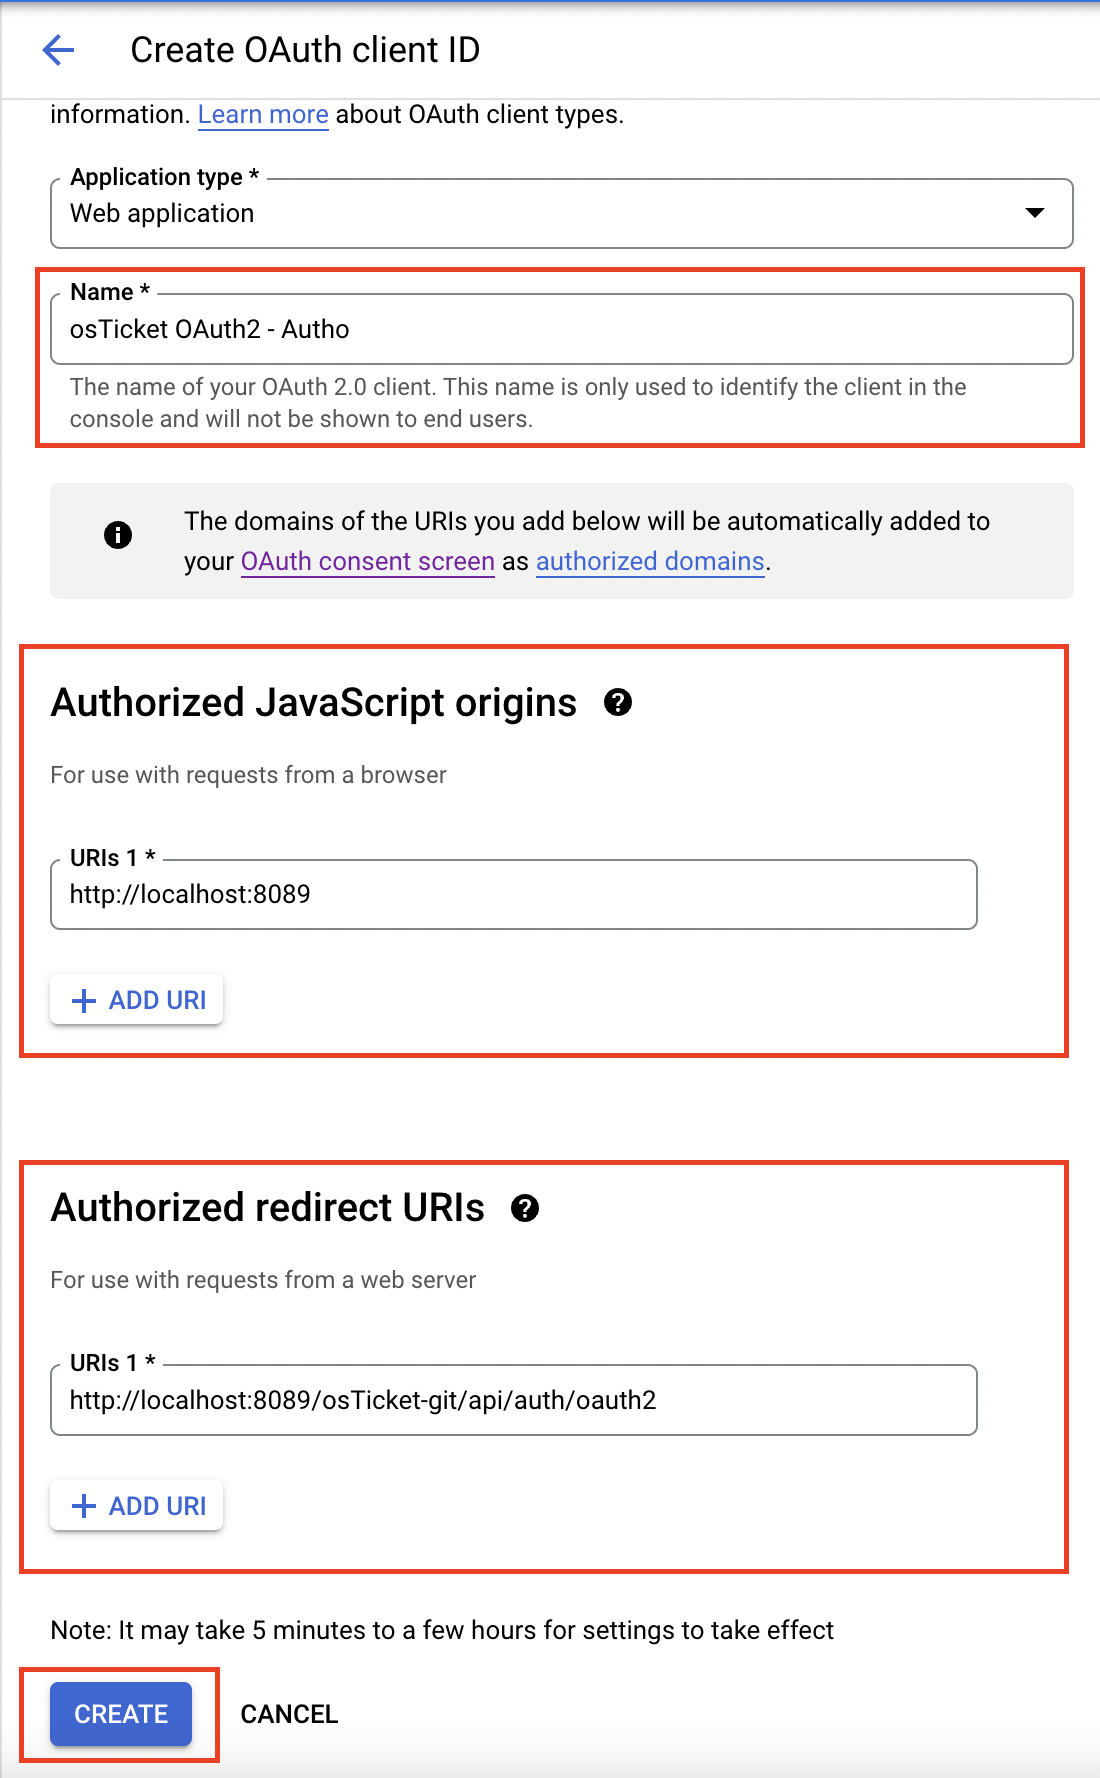 Create OAuth client ID form